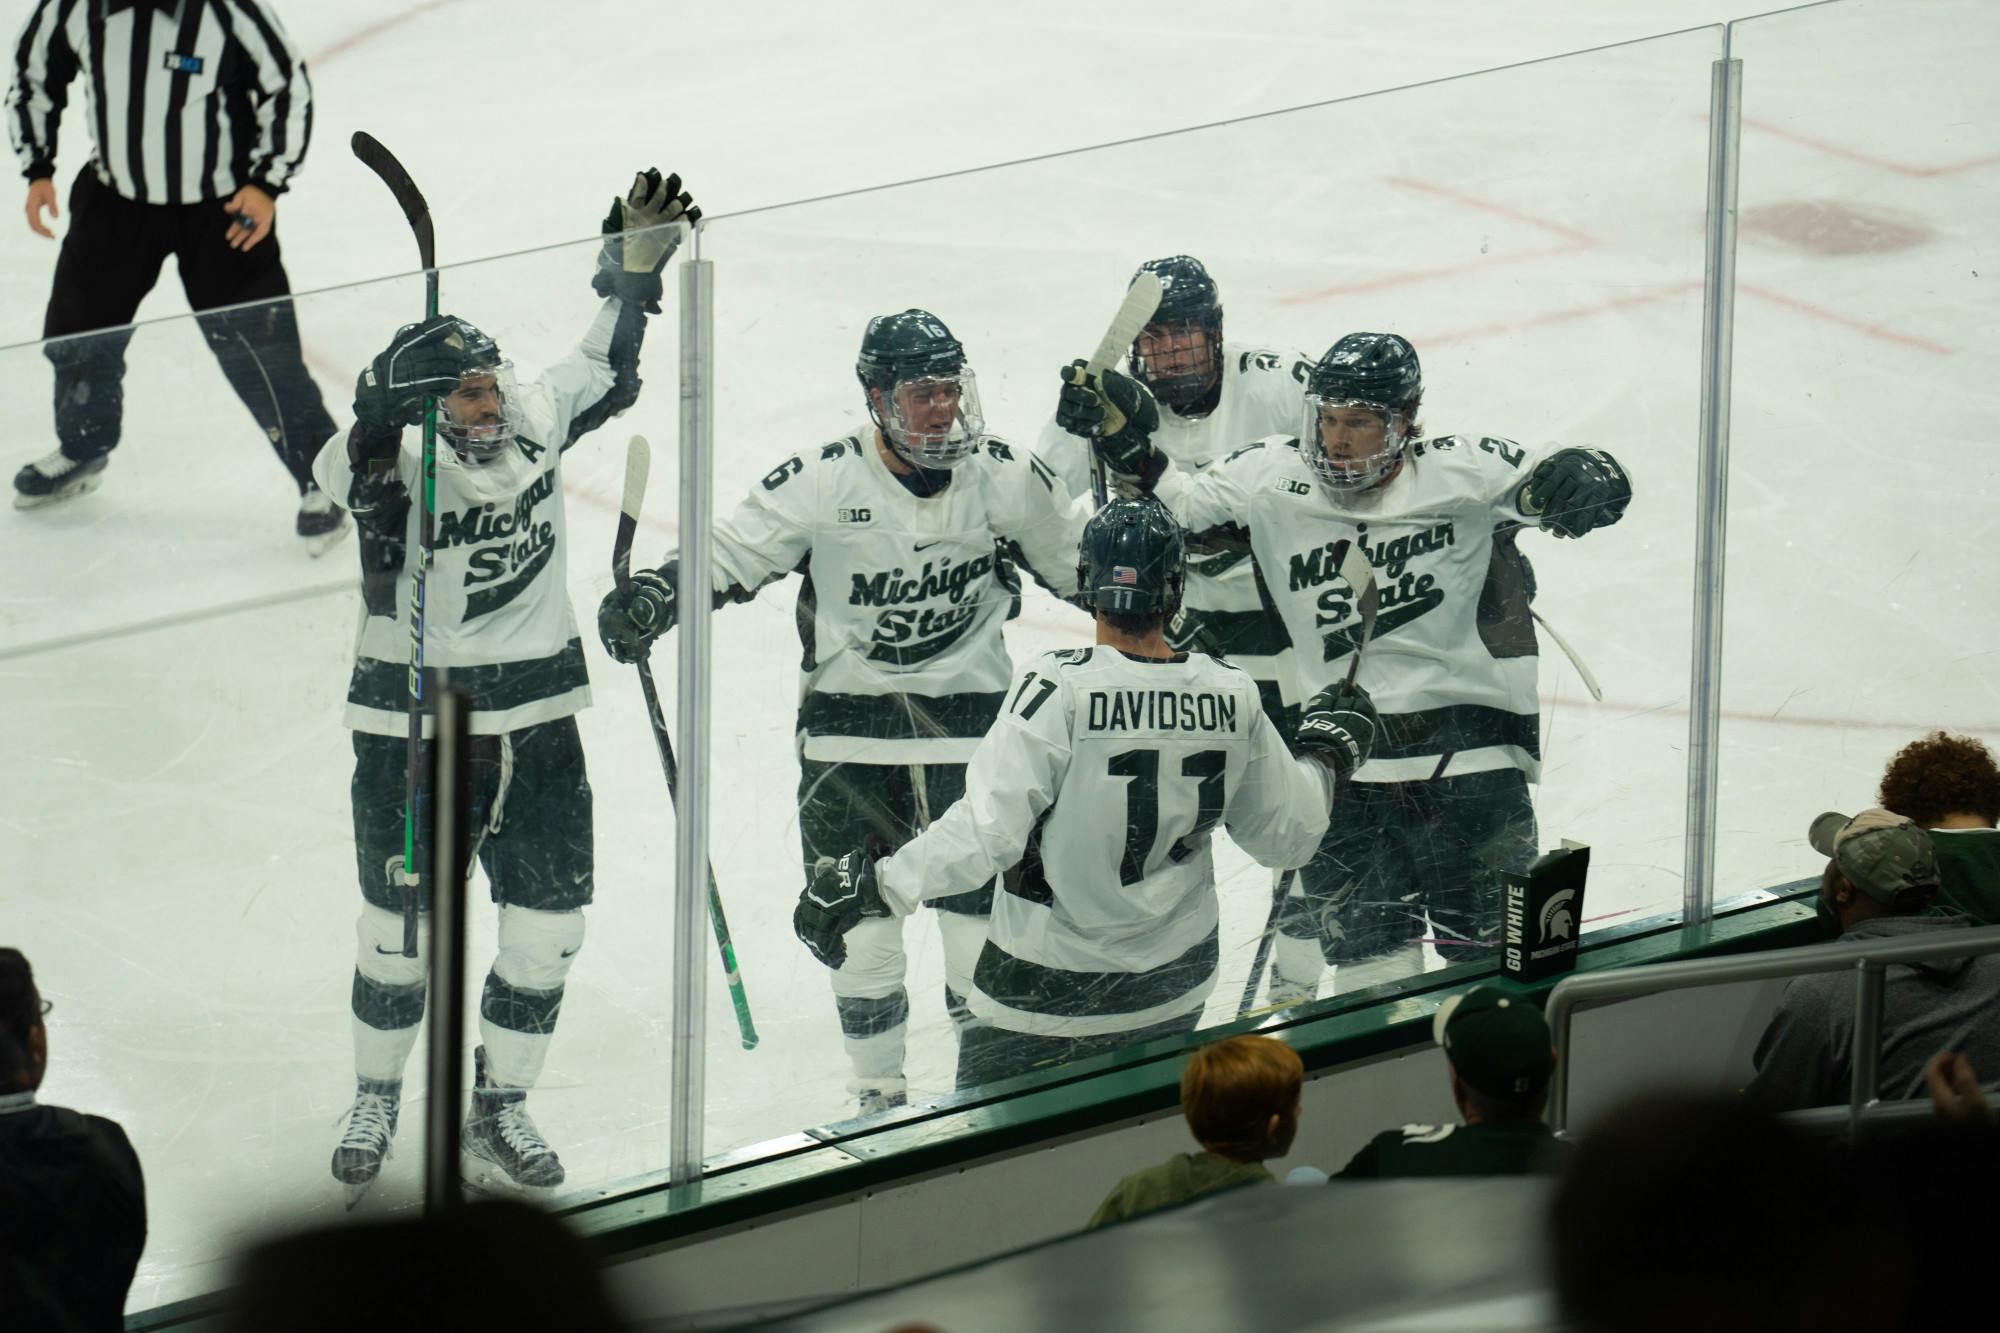 <p>The Spartans celebrate after scoring a point at Munn Ice Arena on Oct. 1, 2022. The Spartans lost to the USNTDP 4-3.</p>